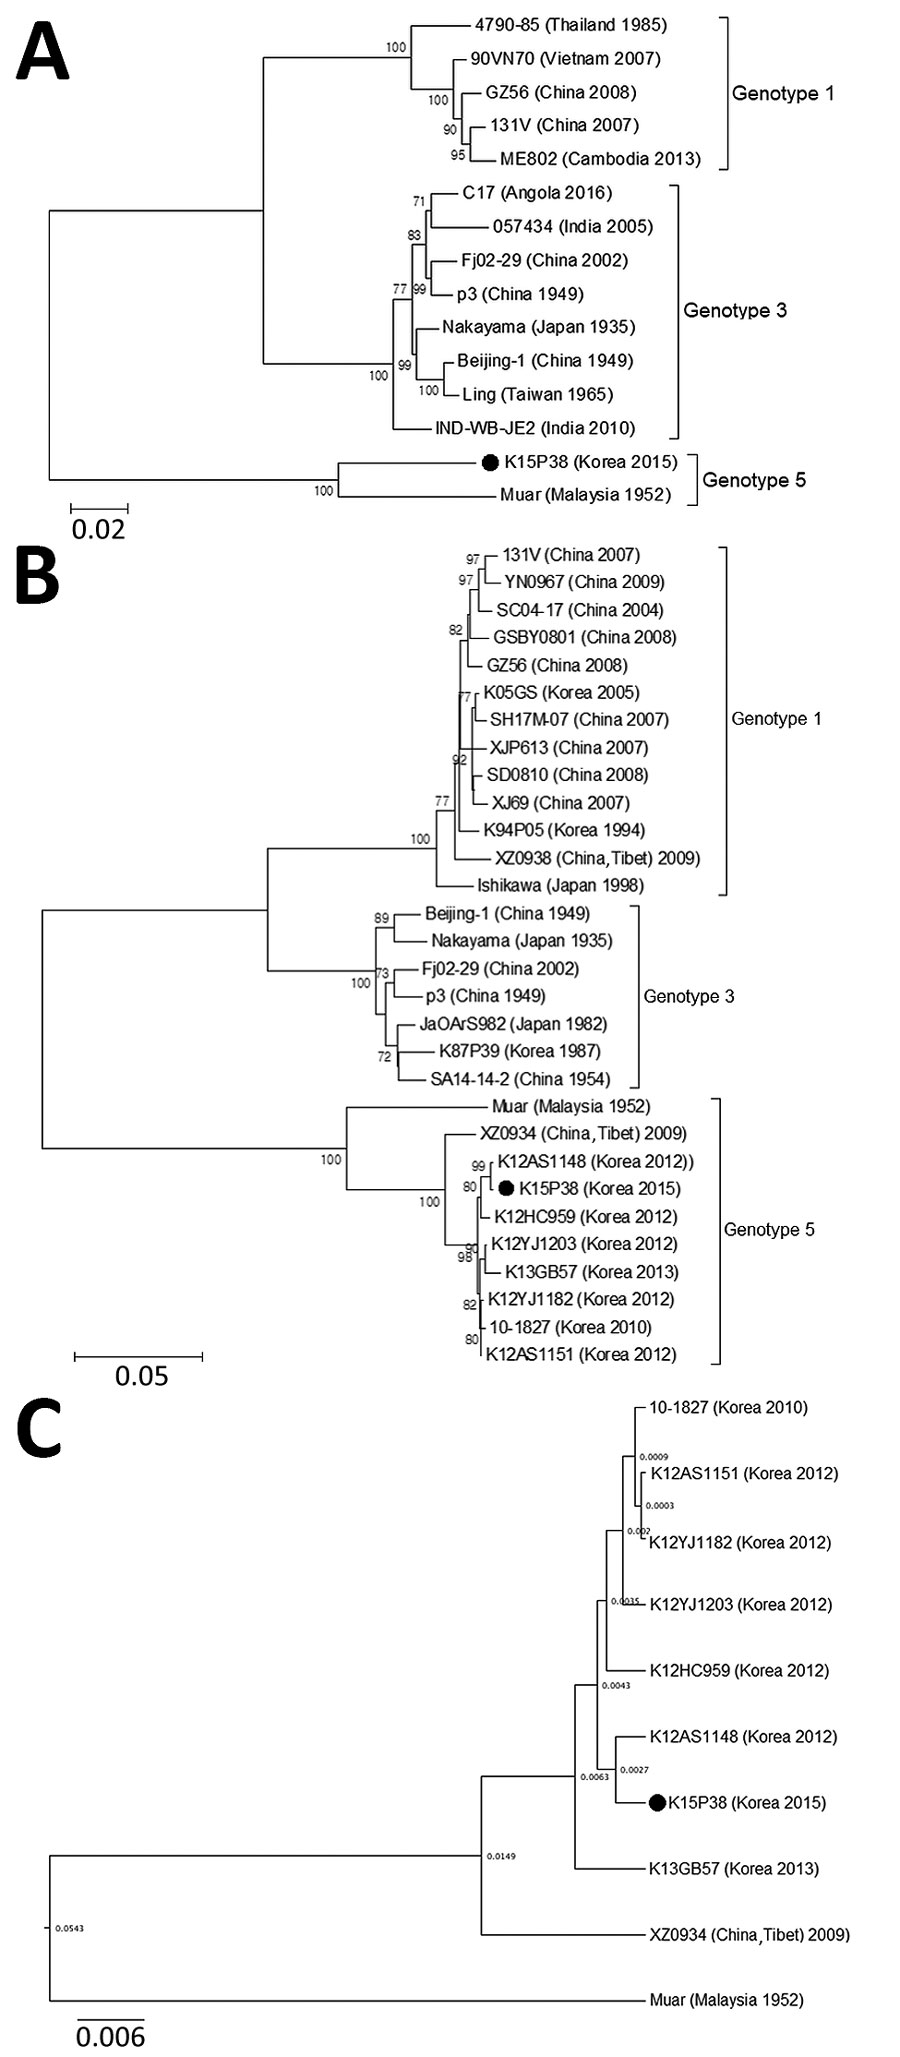 Phylogenetic trees of Japanese encephalitis virus (JEV) genotypes 1, 3, and 5, South Korea. A) Entire open reading frame of JEV human isolates. B) Envelope protein genes of JEV human isolates. C) Divergence time estimation based on the envelope protein genes of JEV genotype 5. Bootstrap probabilities (values along branches) of each node were calculated by using 1,000 replicates. Branches showing quartet puzzling reliability &gt;70% can be considered well supported. Black circles indicate K15P38 